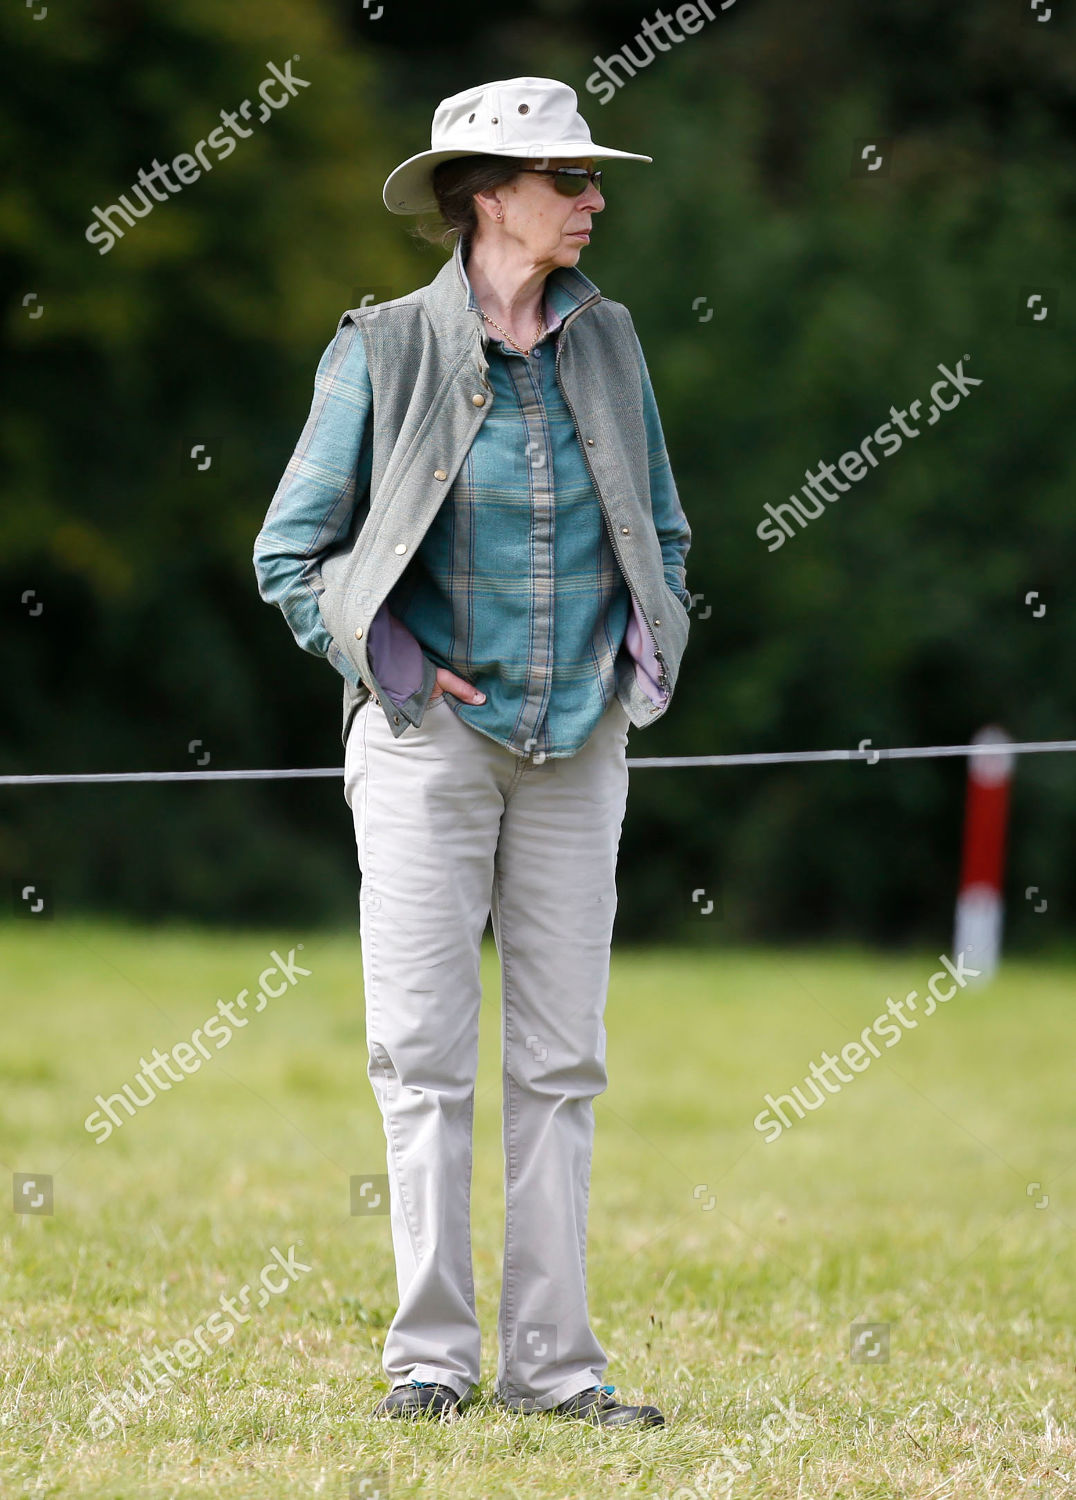 the-whatley-manor-horse-trials-gatcombe-park-gloucestershire-uk-shutterstock-editorial-10414494q.jpg